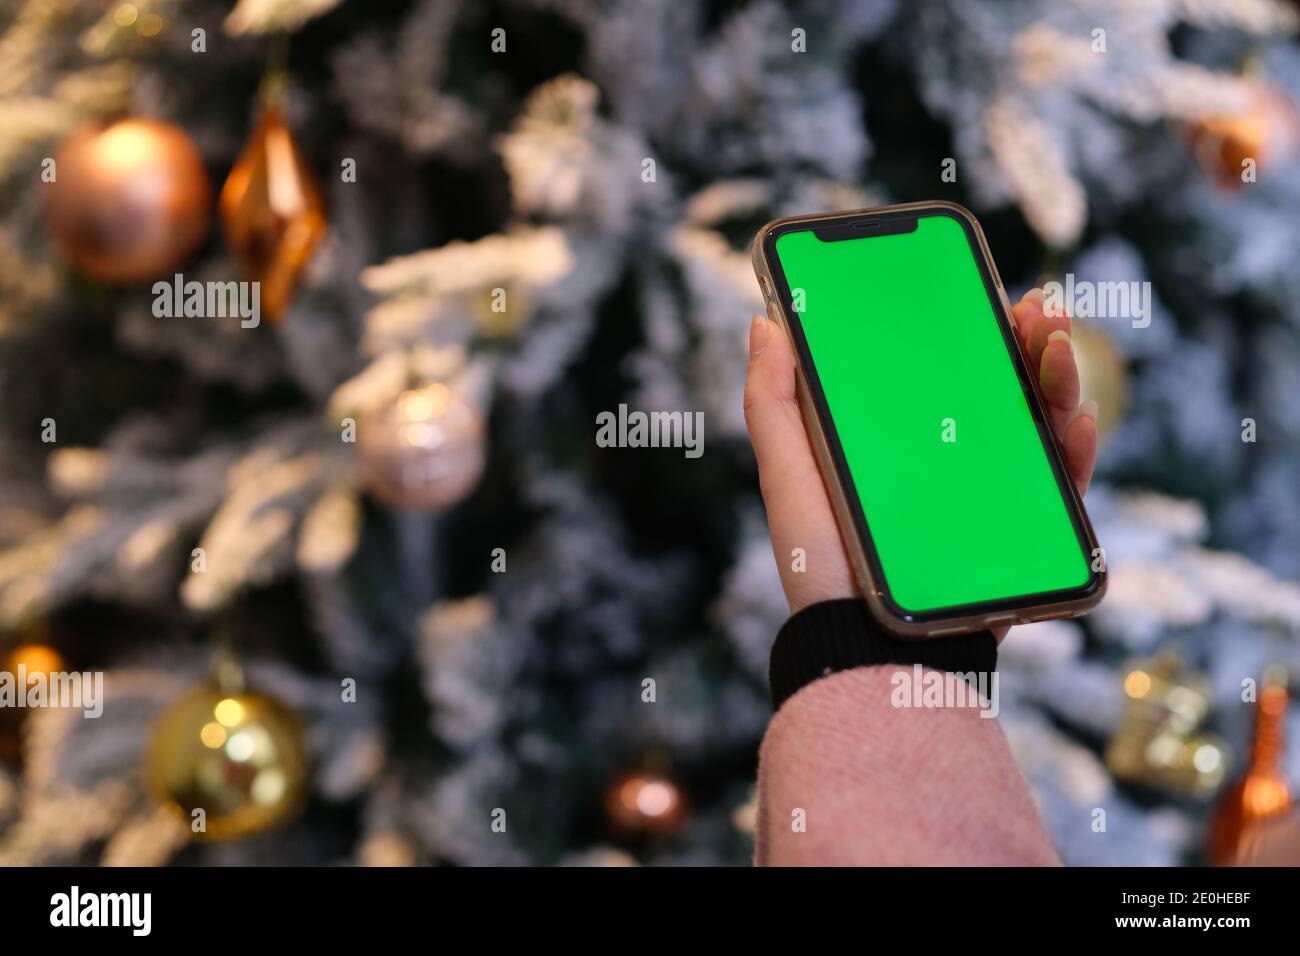 over the shoulder view of people holding green screen phone. Blur Christmas tree background Stock Photo